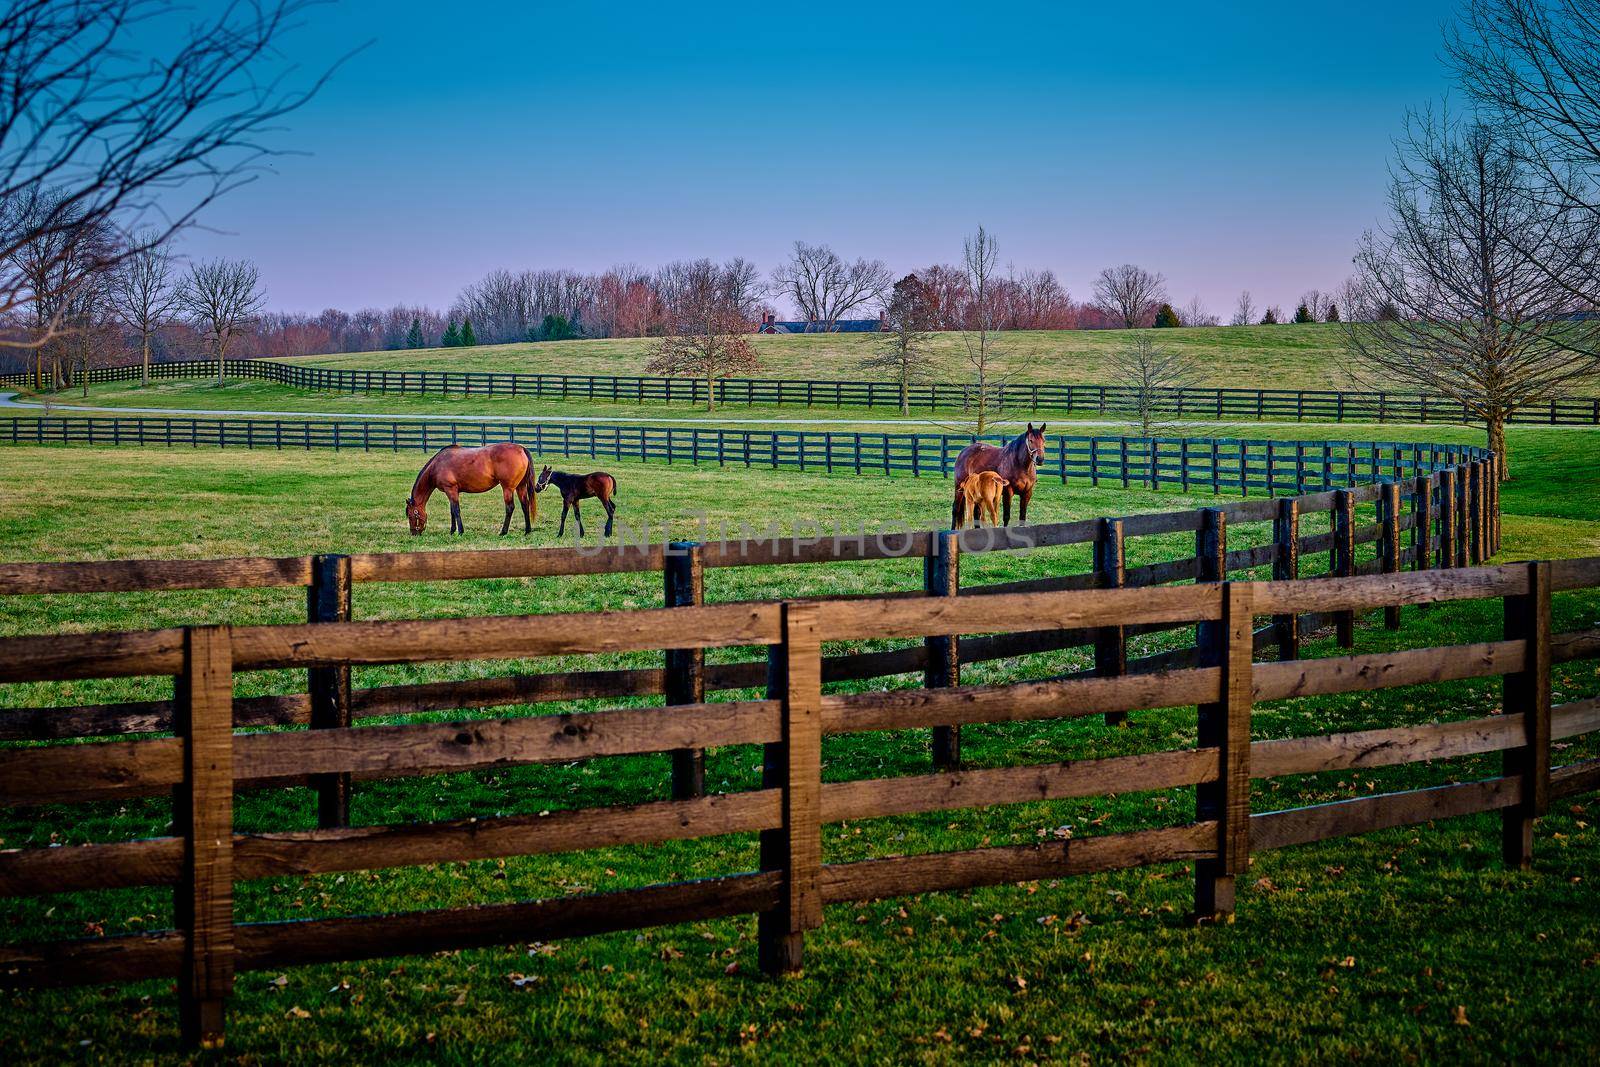 A pair of mares and foals grazing on early spring grass at a thoroughbred farm.